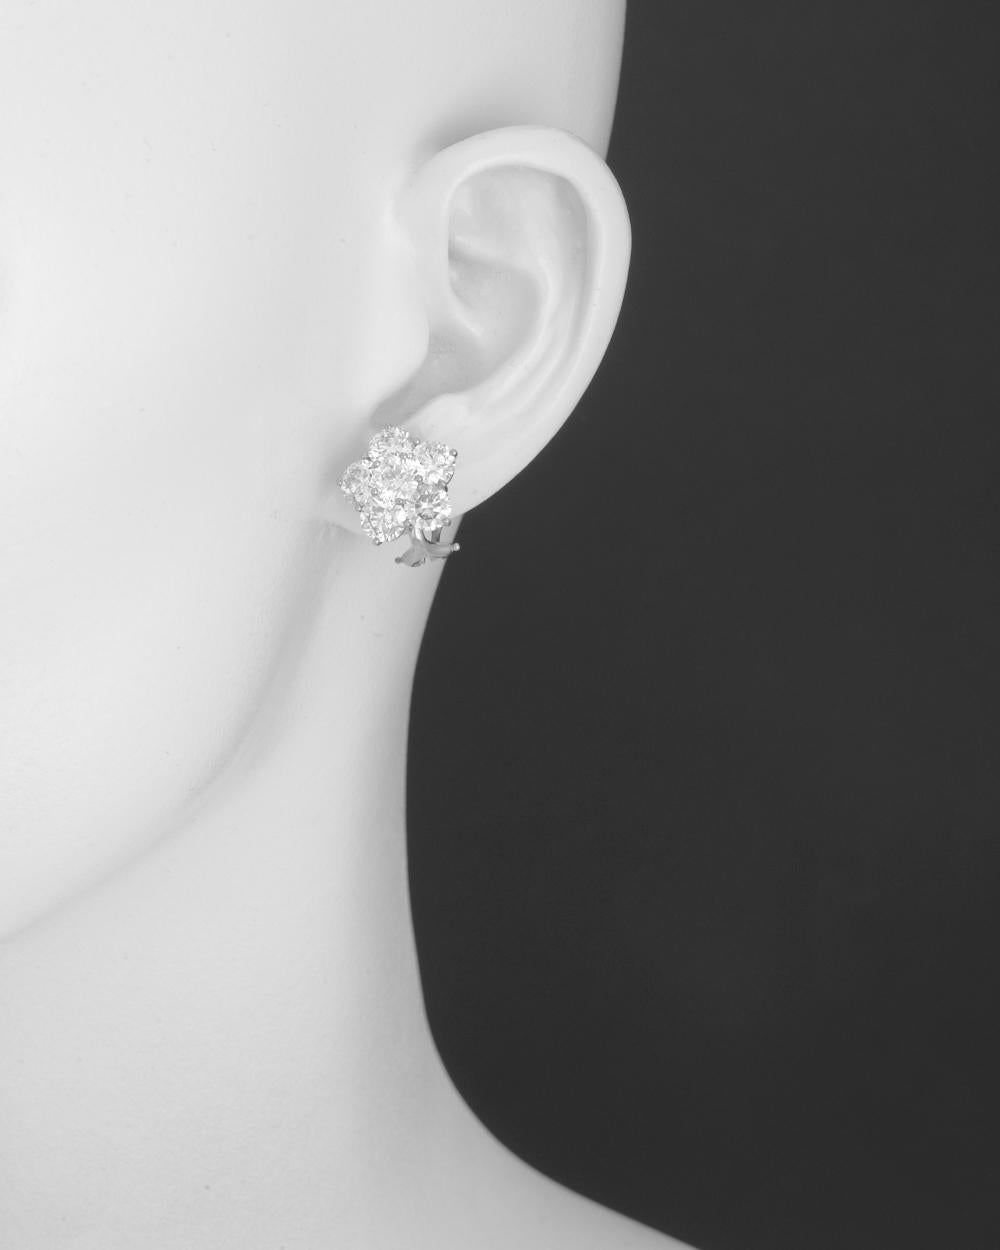 Like stars in the night sky, the Astra collection has an eternal sparkle. Thanks to a specific dimensional arrangement of round brilliant-cut diamonds, each cluster is designed to radiate light. These Astra earrings are handmade in high-polished